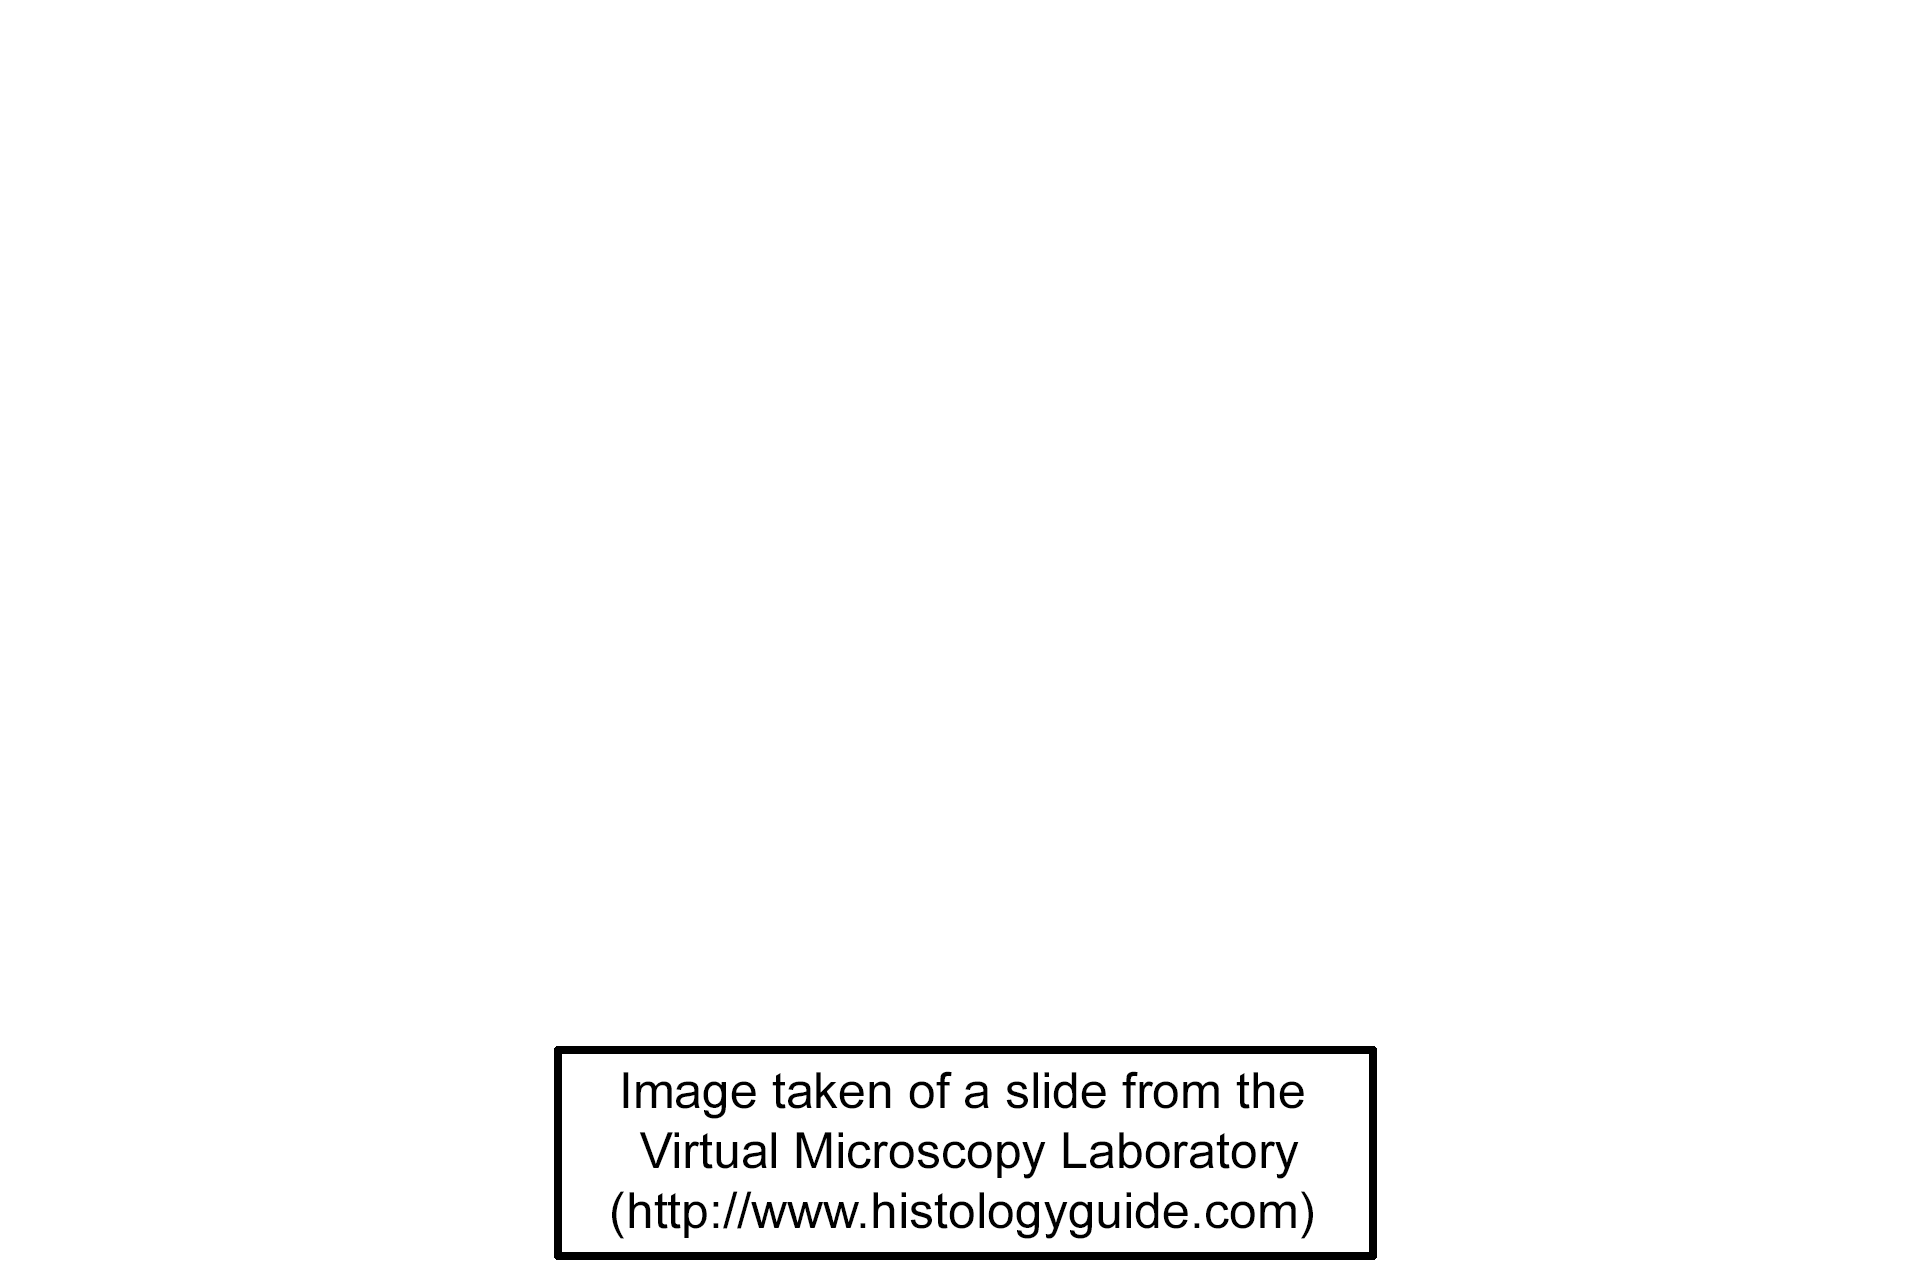 Image source <p>Image taken of a slide from the Virtual Microscopy Laboratory (http://www.histologyguide.com)</p>
